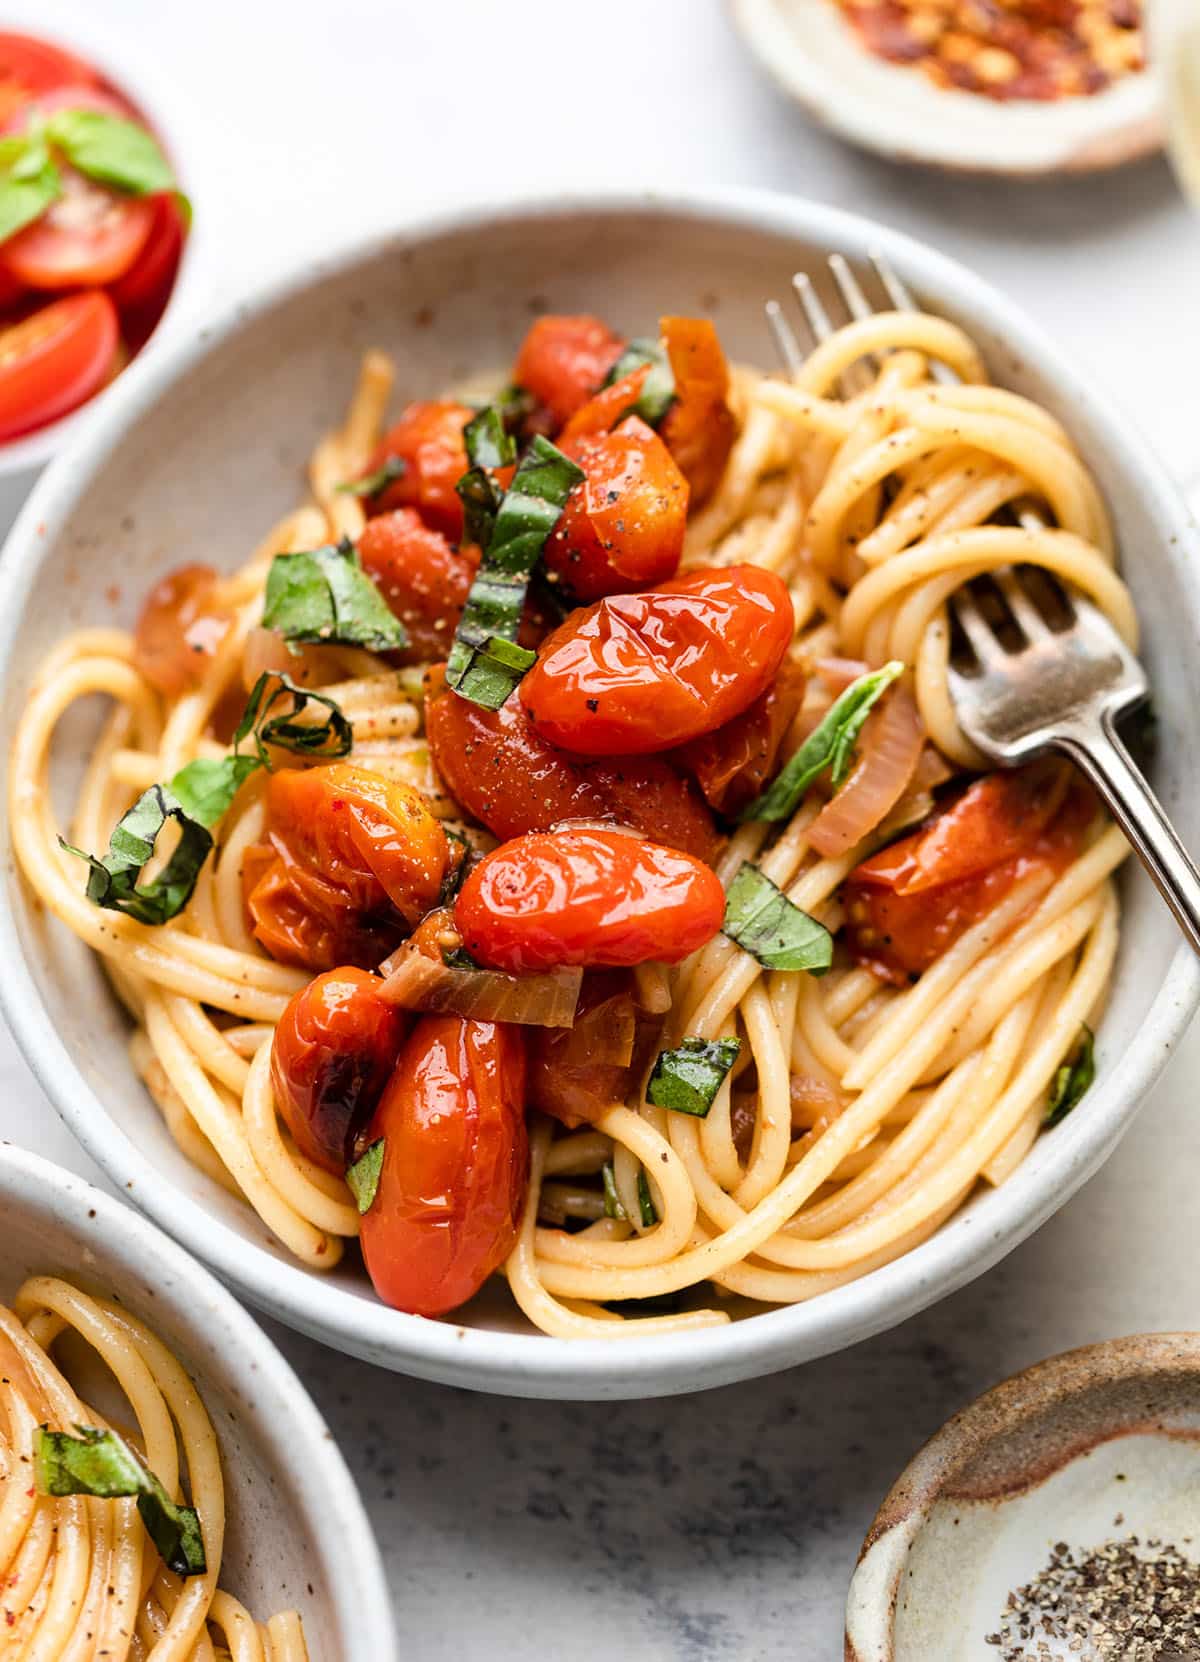 Spaghetti topped with burst tomatoes and fresh basil.